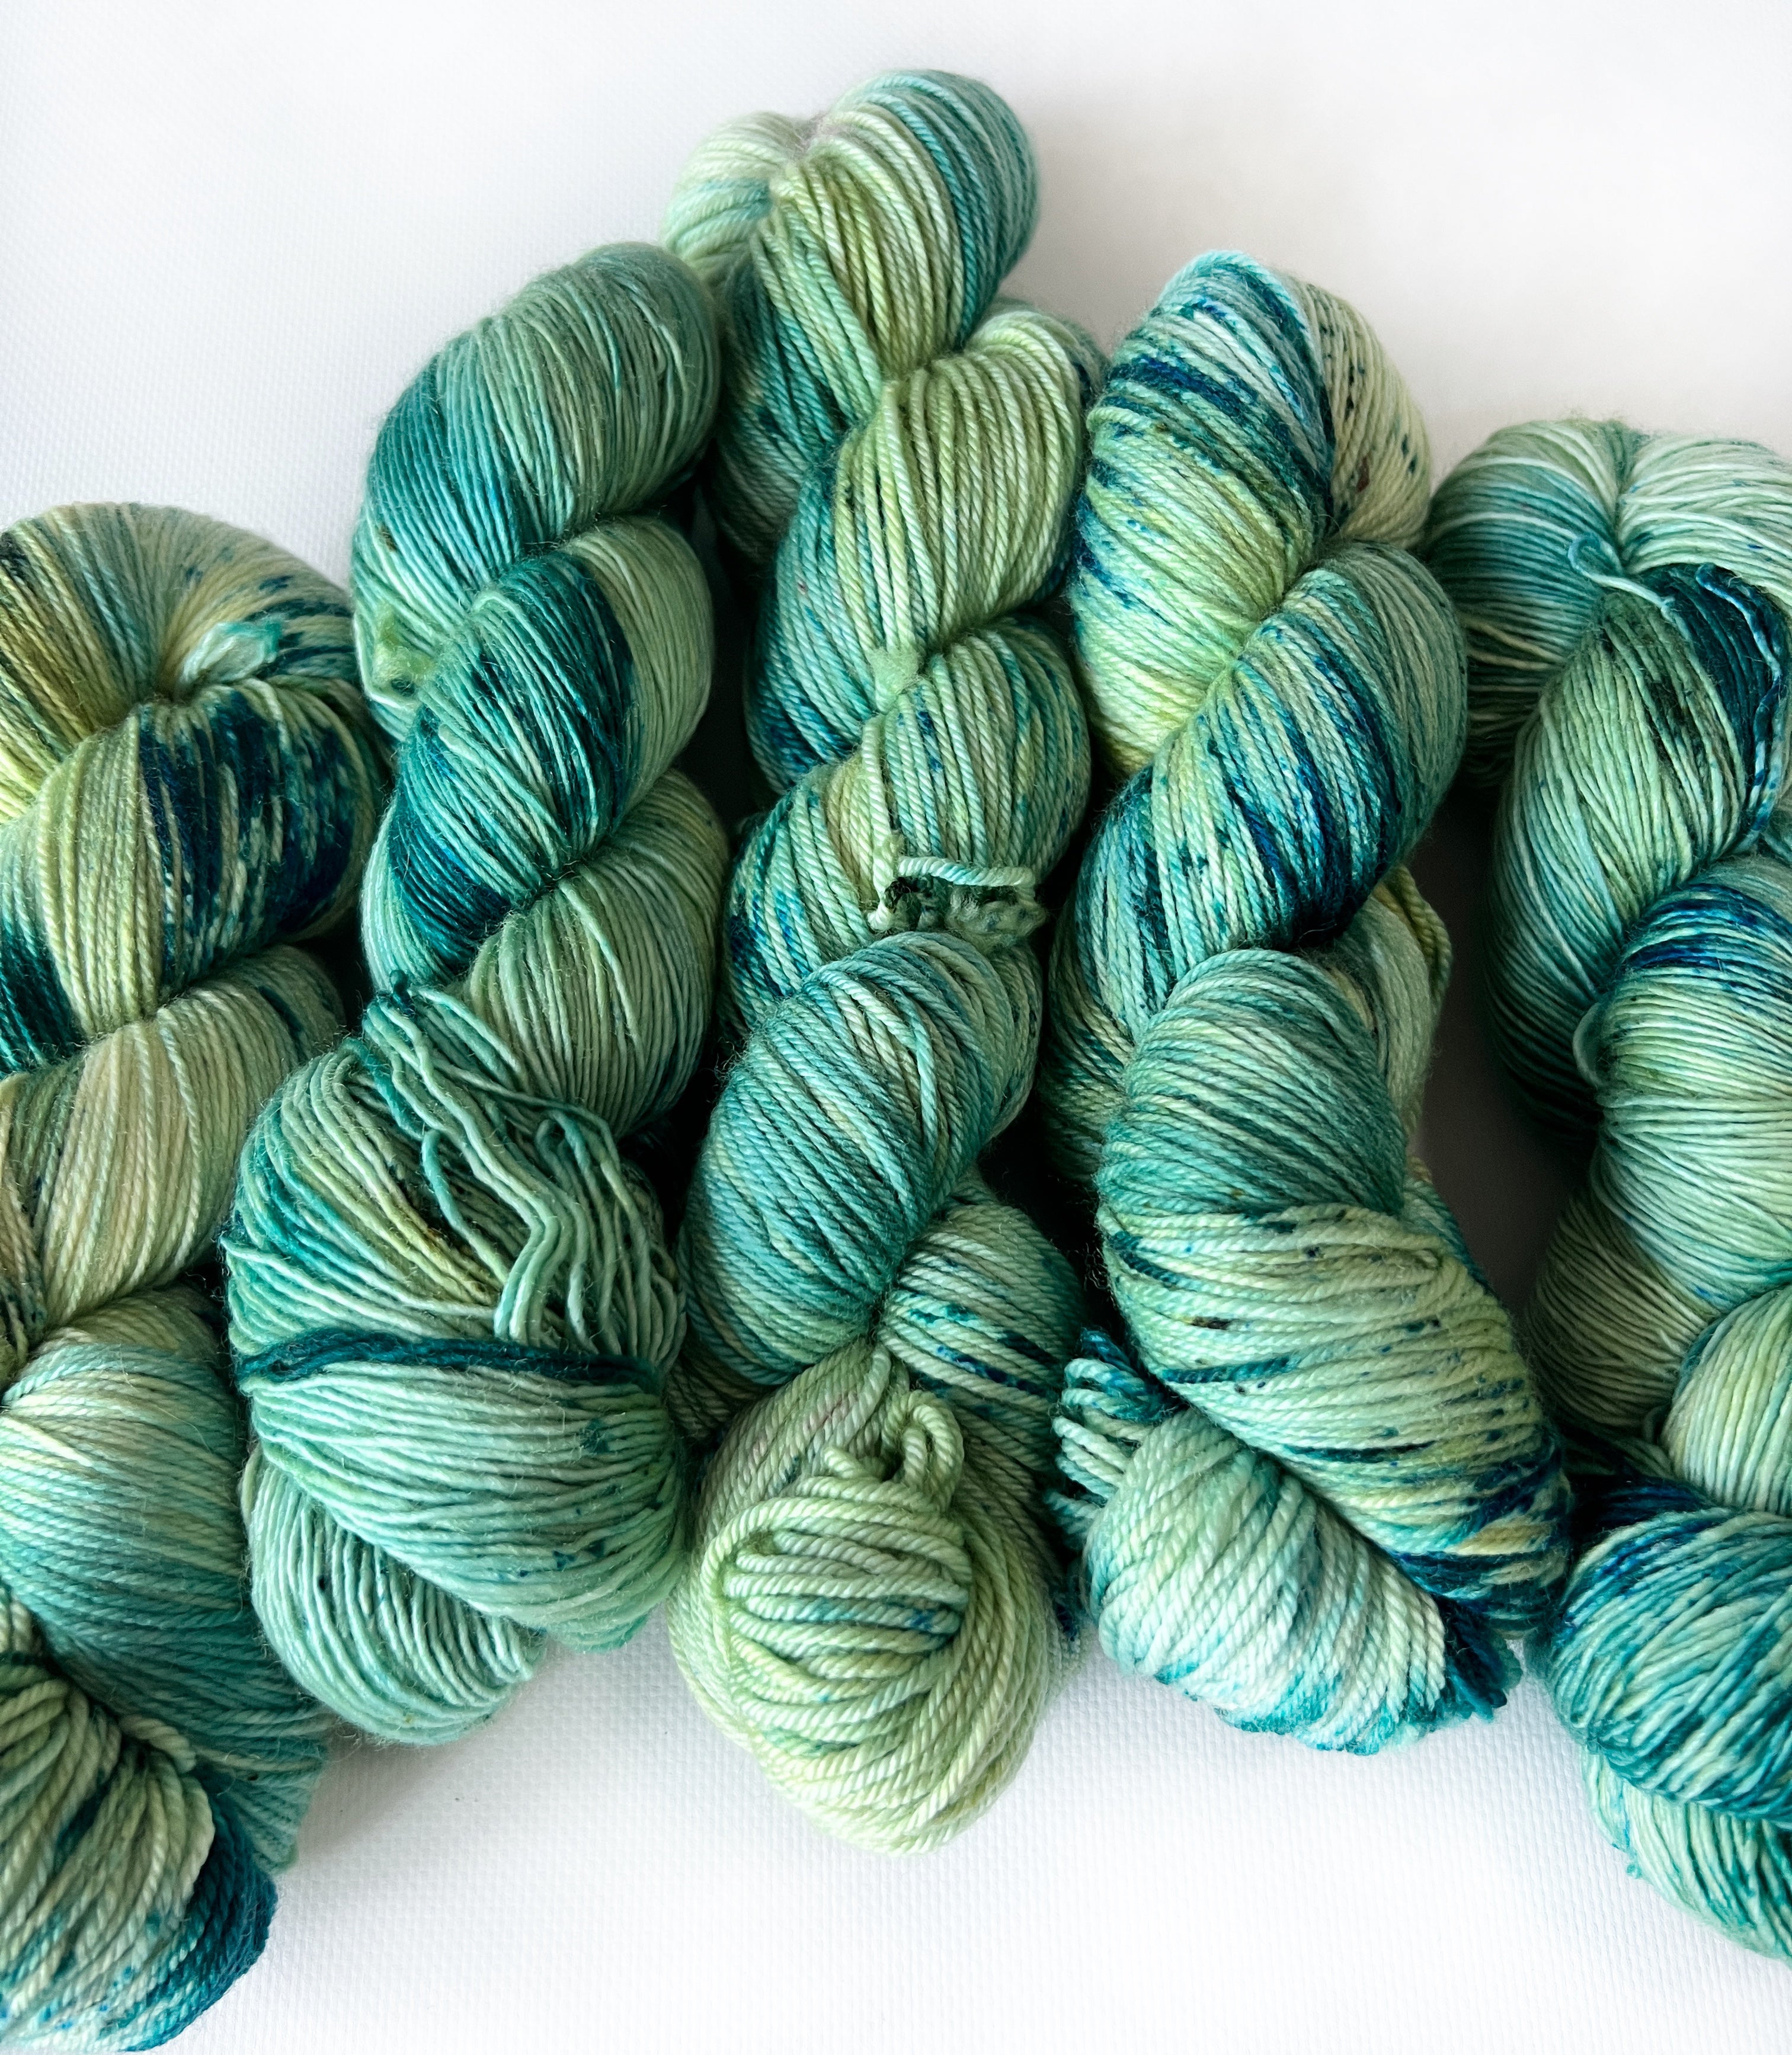 Hand-Dyed Yarns For Sale